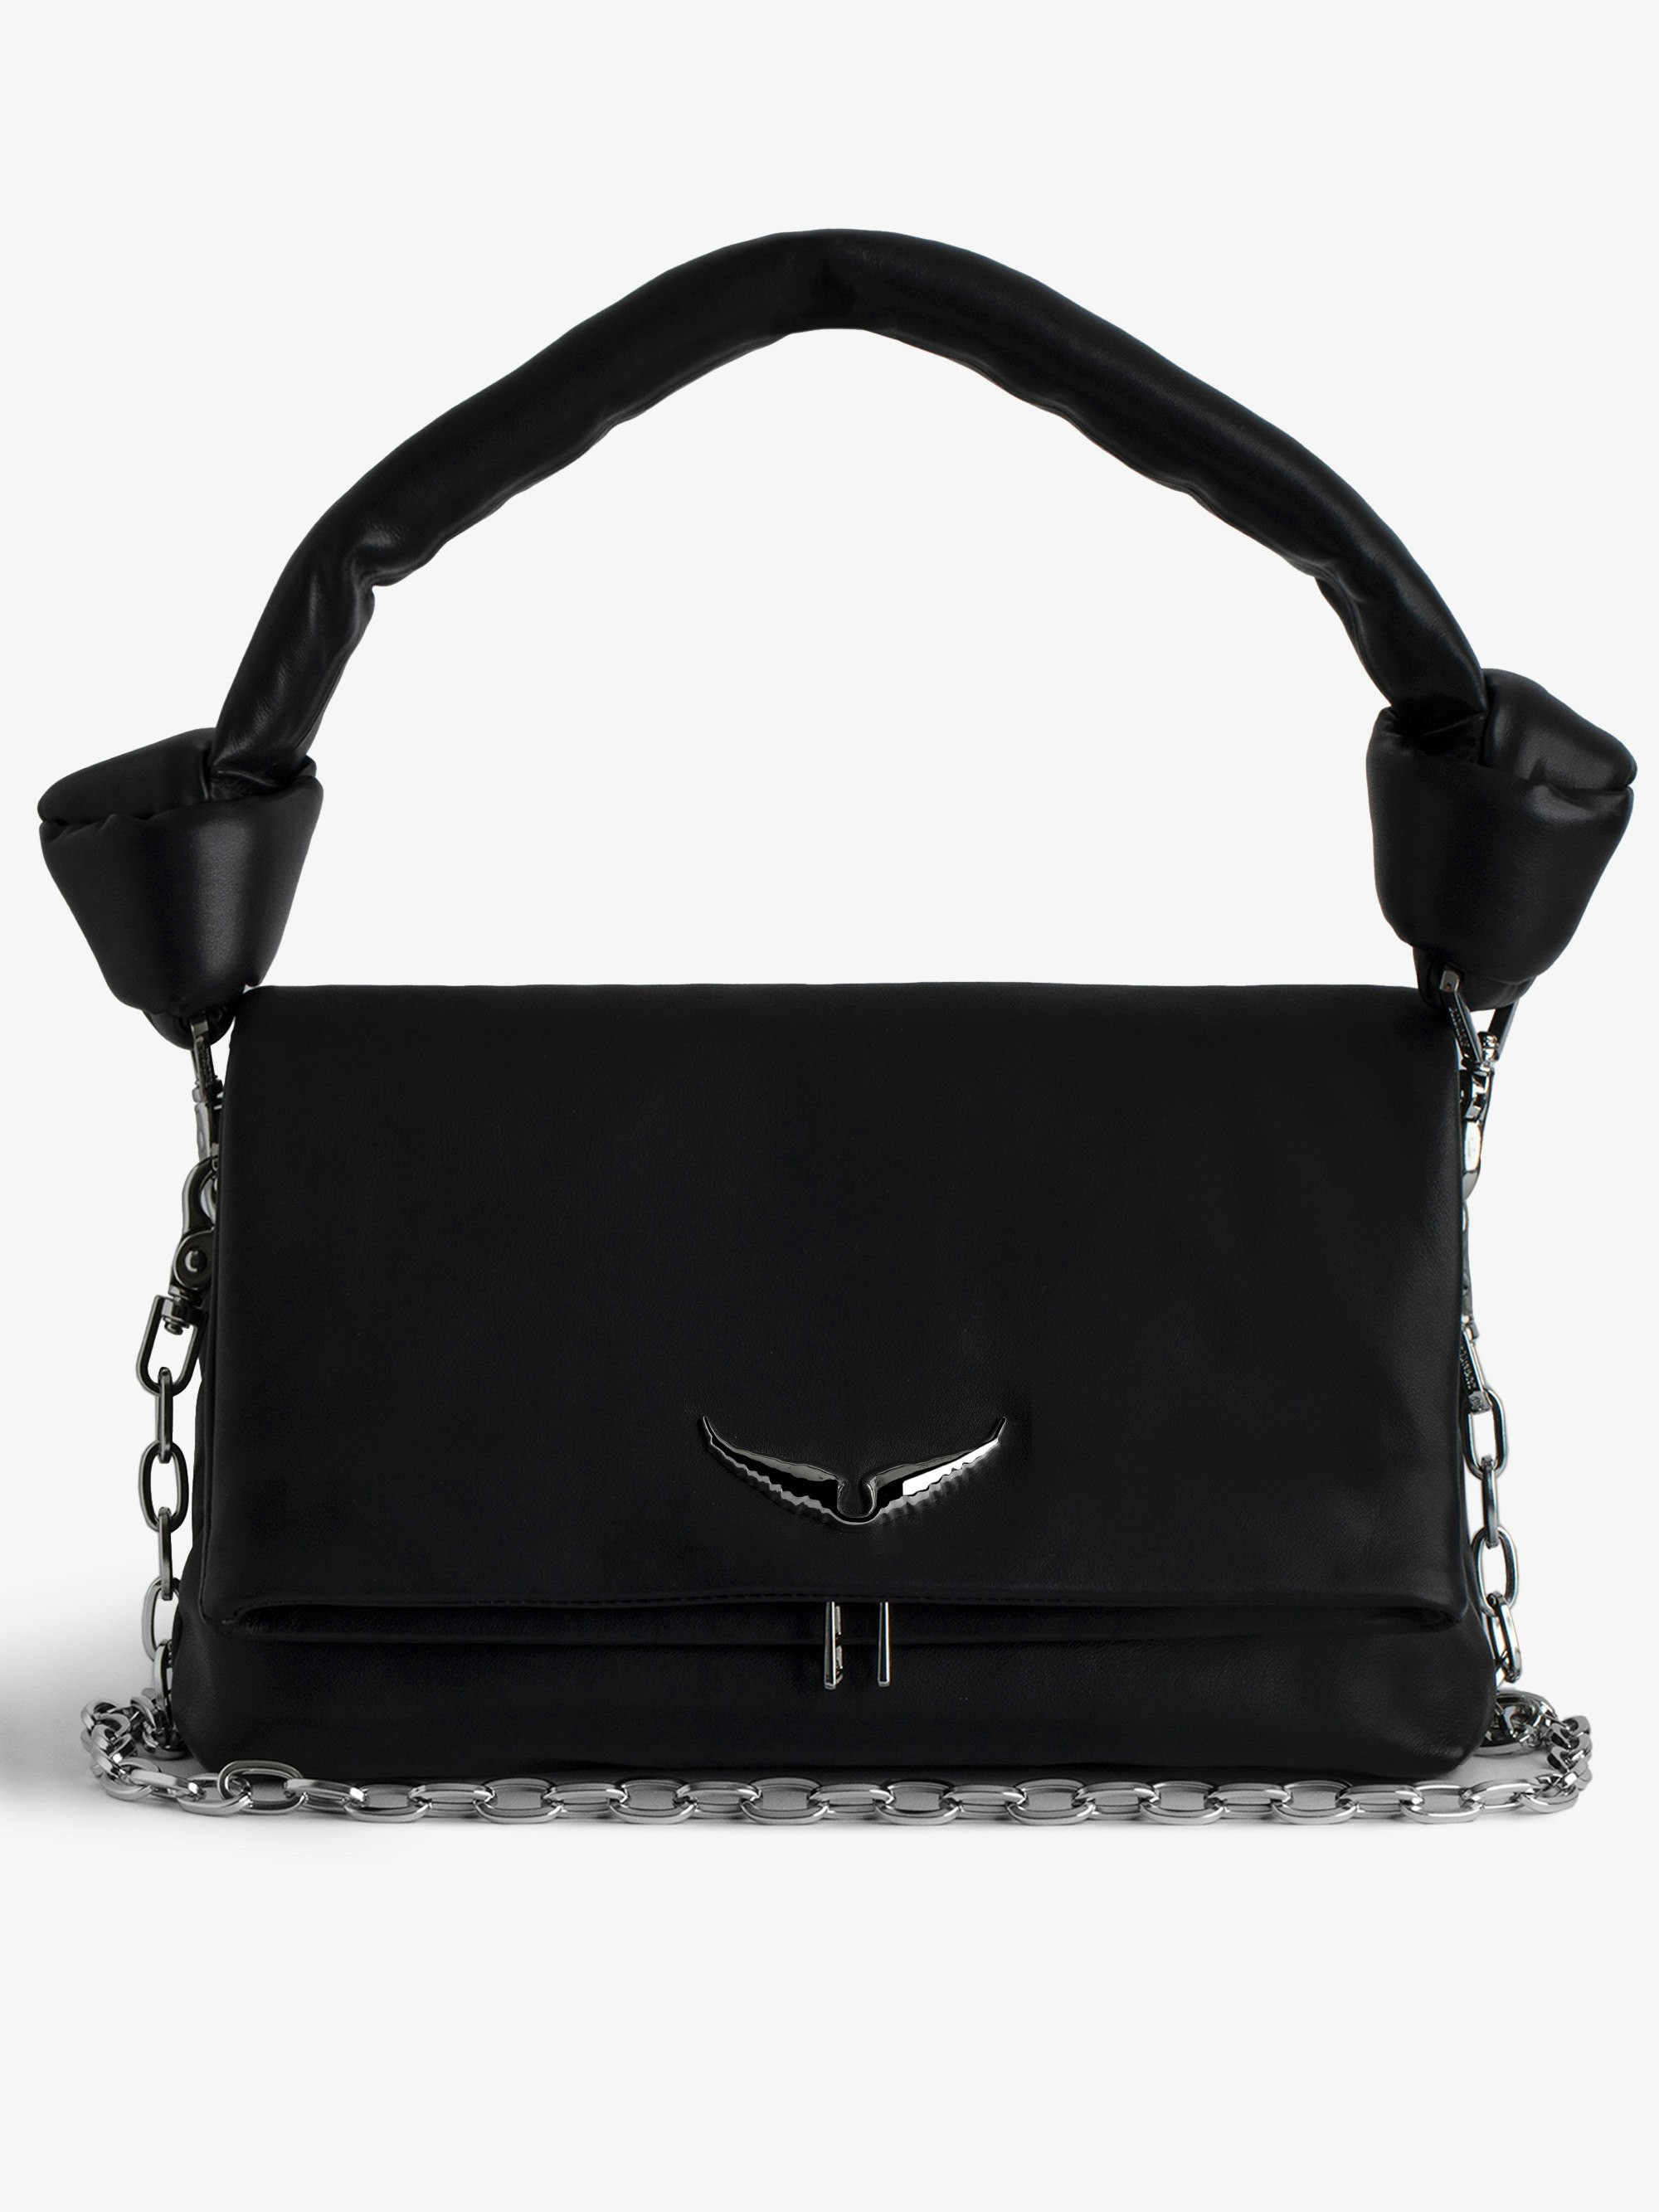 Rocky Eternal Bag - Black smooth leather bag with tied handle and chain shoulder strap.